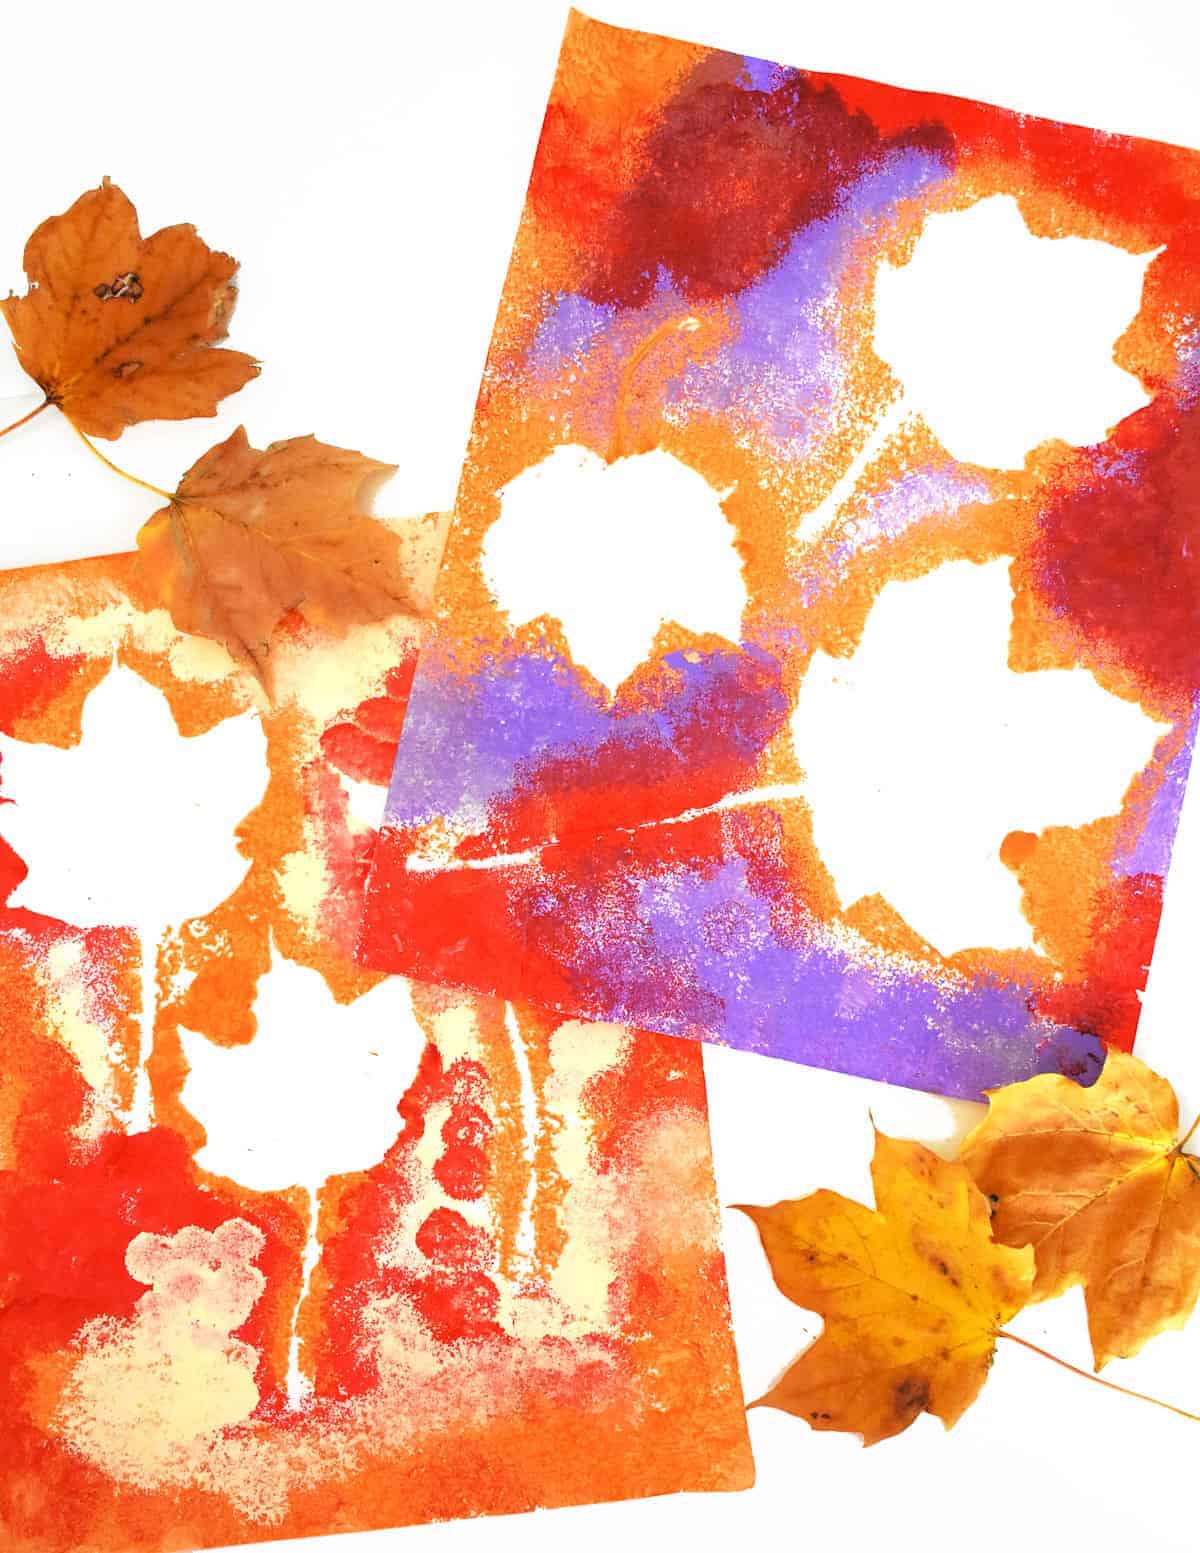 Fall Leaf Pom Pom Art with leaves next to it on white background